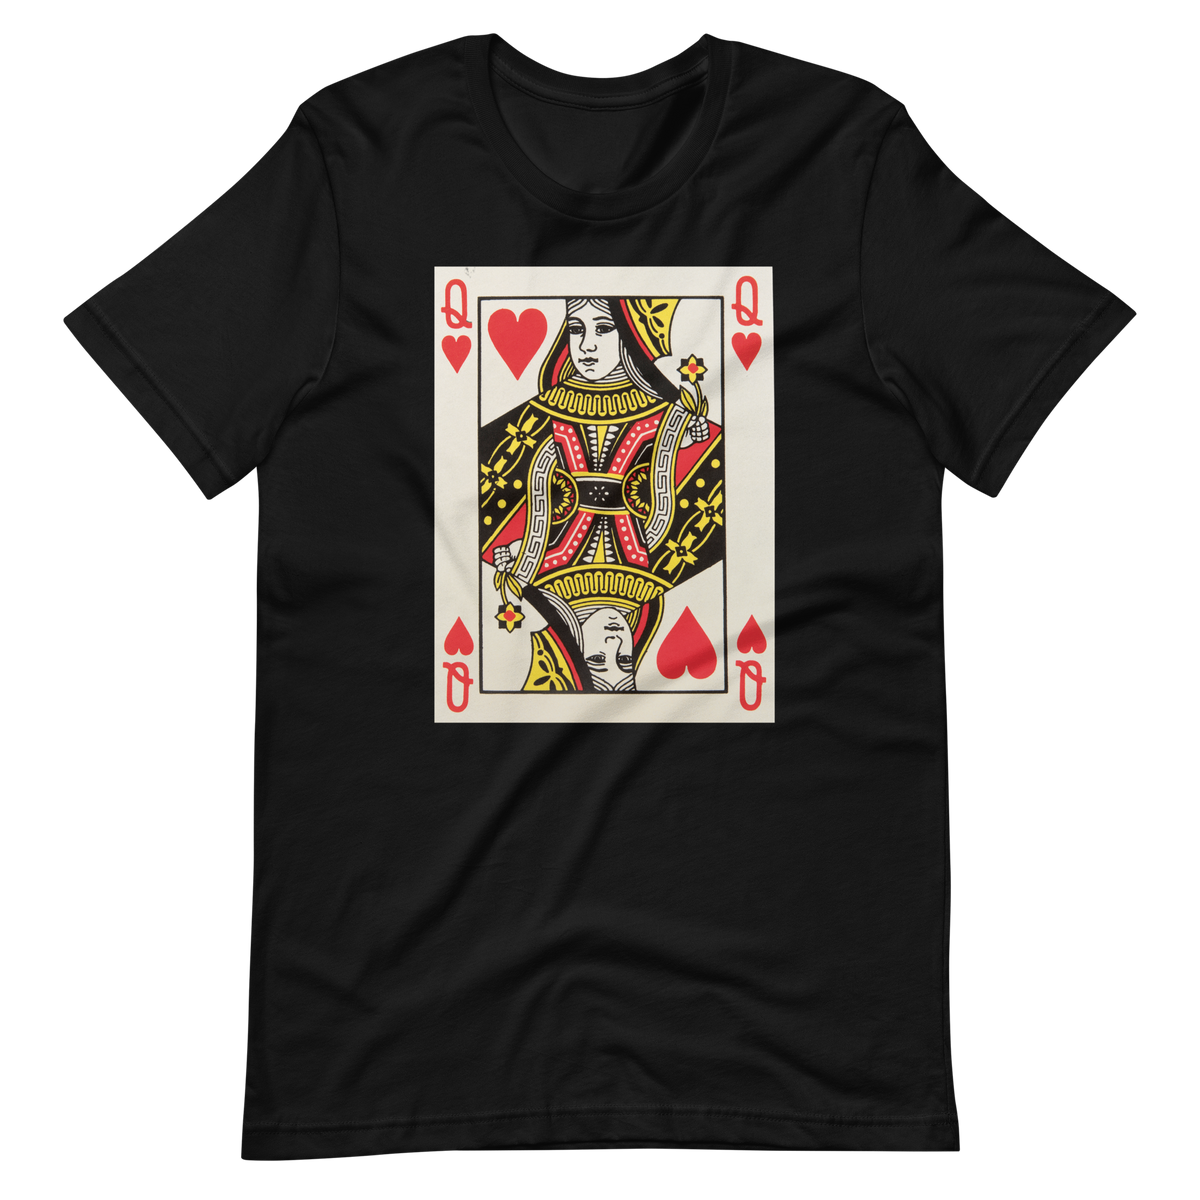 Valentines day T-Shirt  Retro Vintage Valentine  Red Queen Playing Card  Queen of Hearts Valentine Shirt  queen of hearts tshirt  Queen of Hearts Feminist  Mothers Day Shirt Gift for Mom  girl boss apparel  gift for wife  gift for girlfriend  feminist tee  empower women shirt